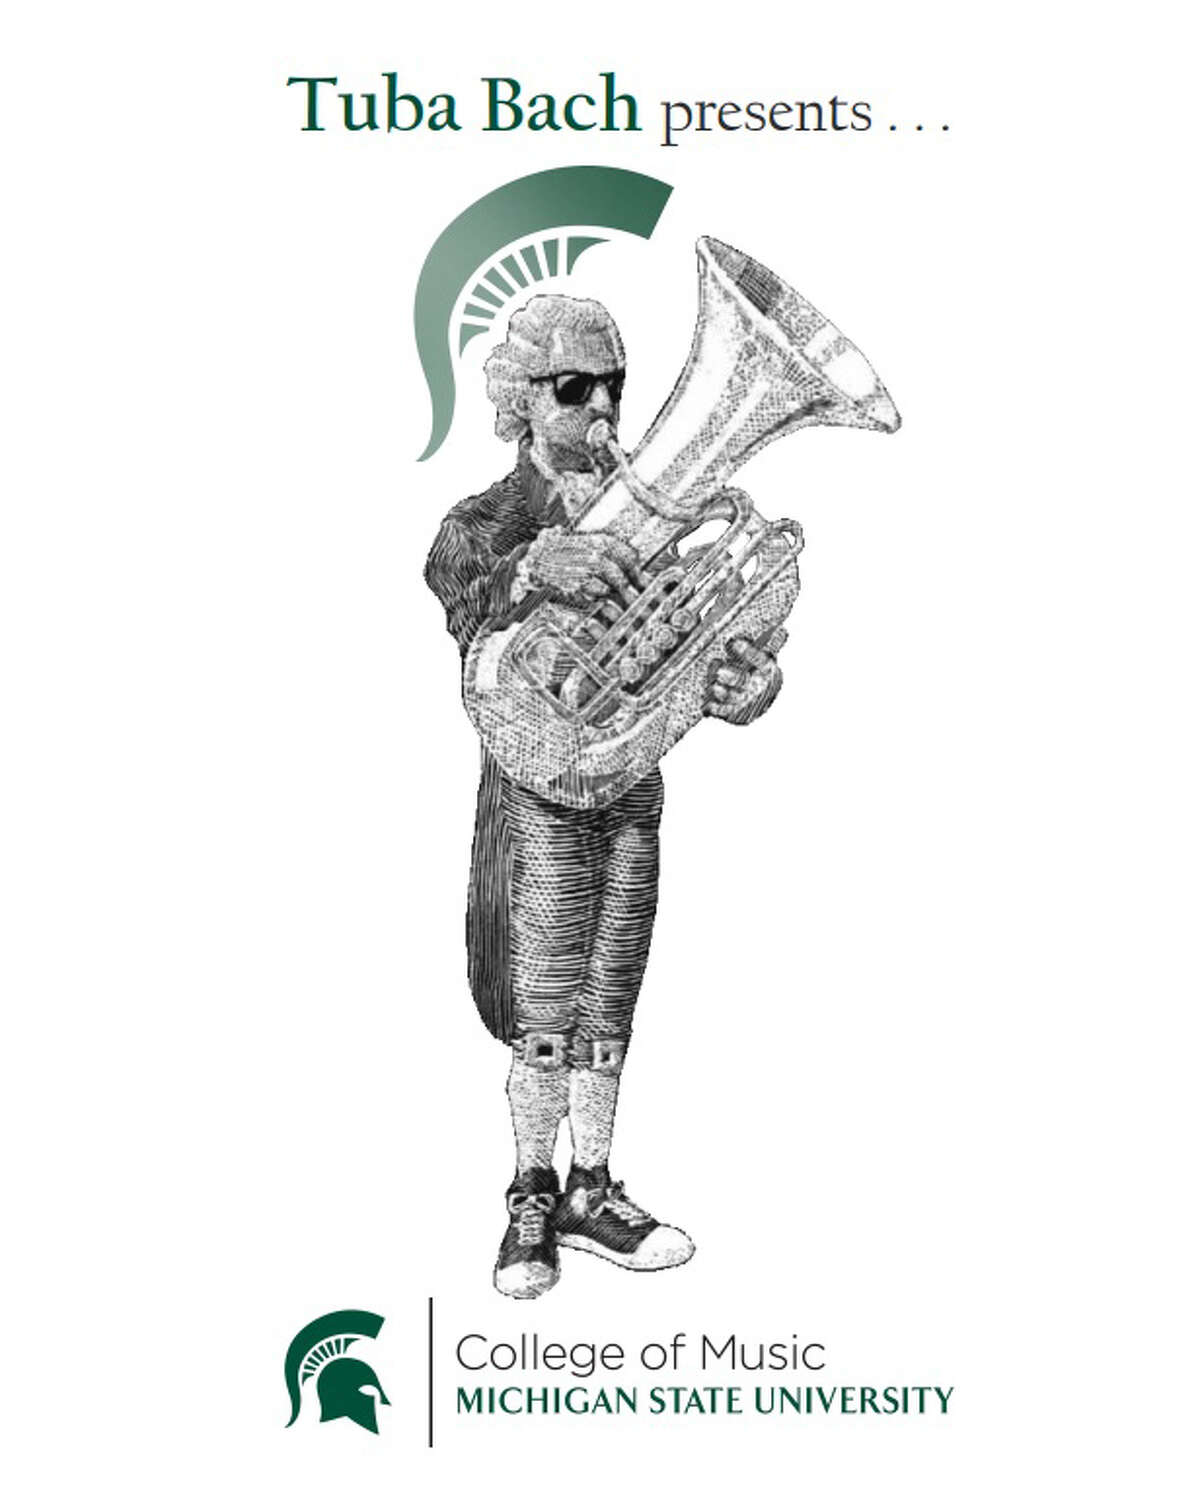 “Tuba Bach Presents ...” concert series is a collaboration of the Michigan State University College of Music and Tuba Bach.